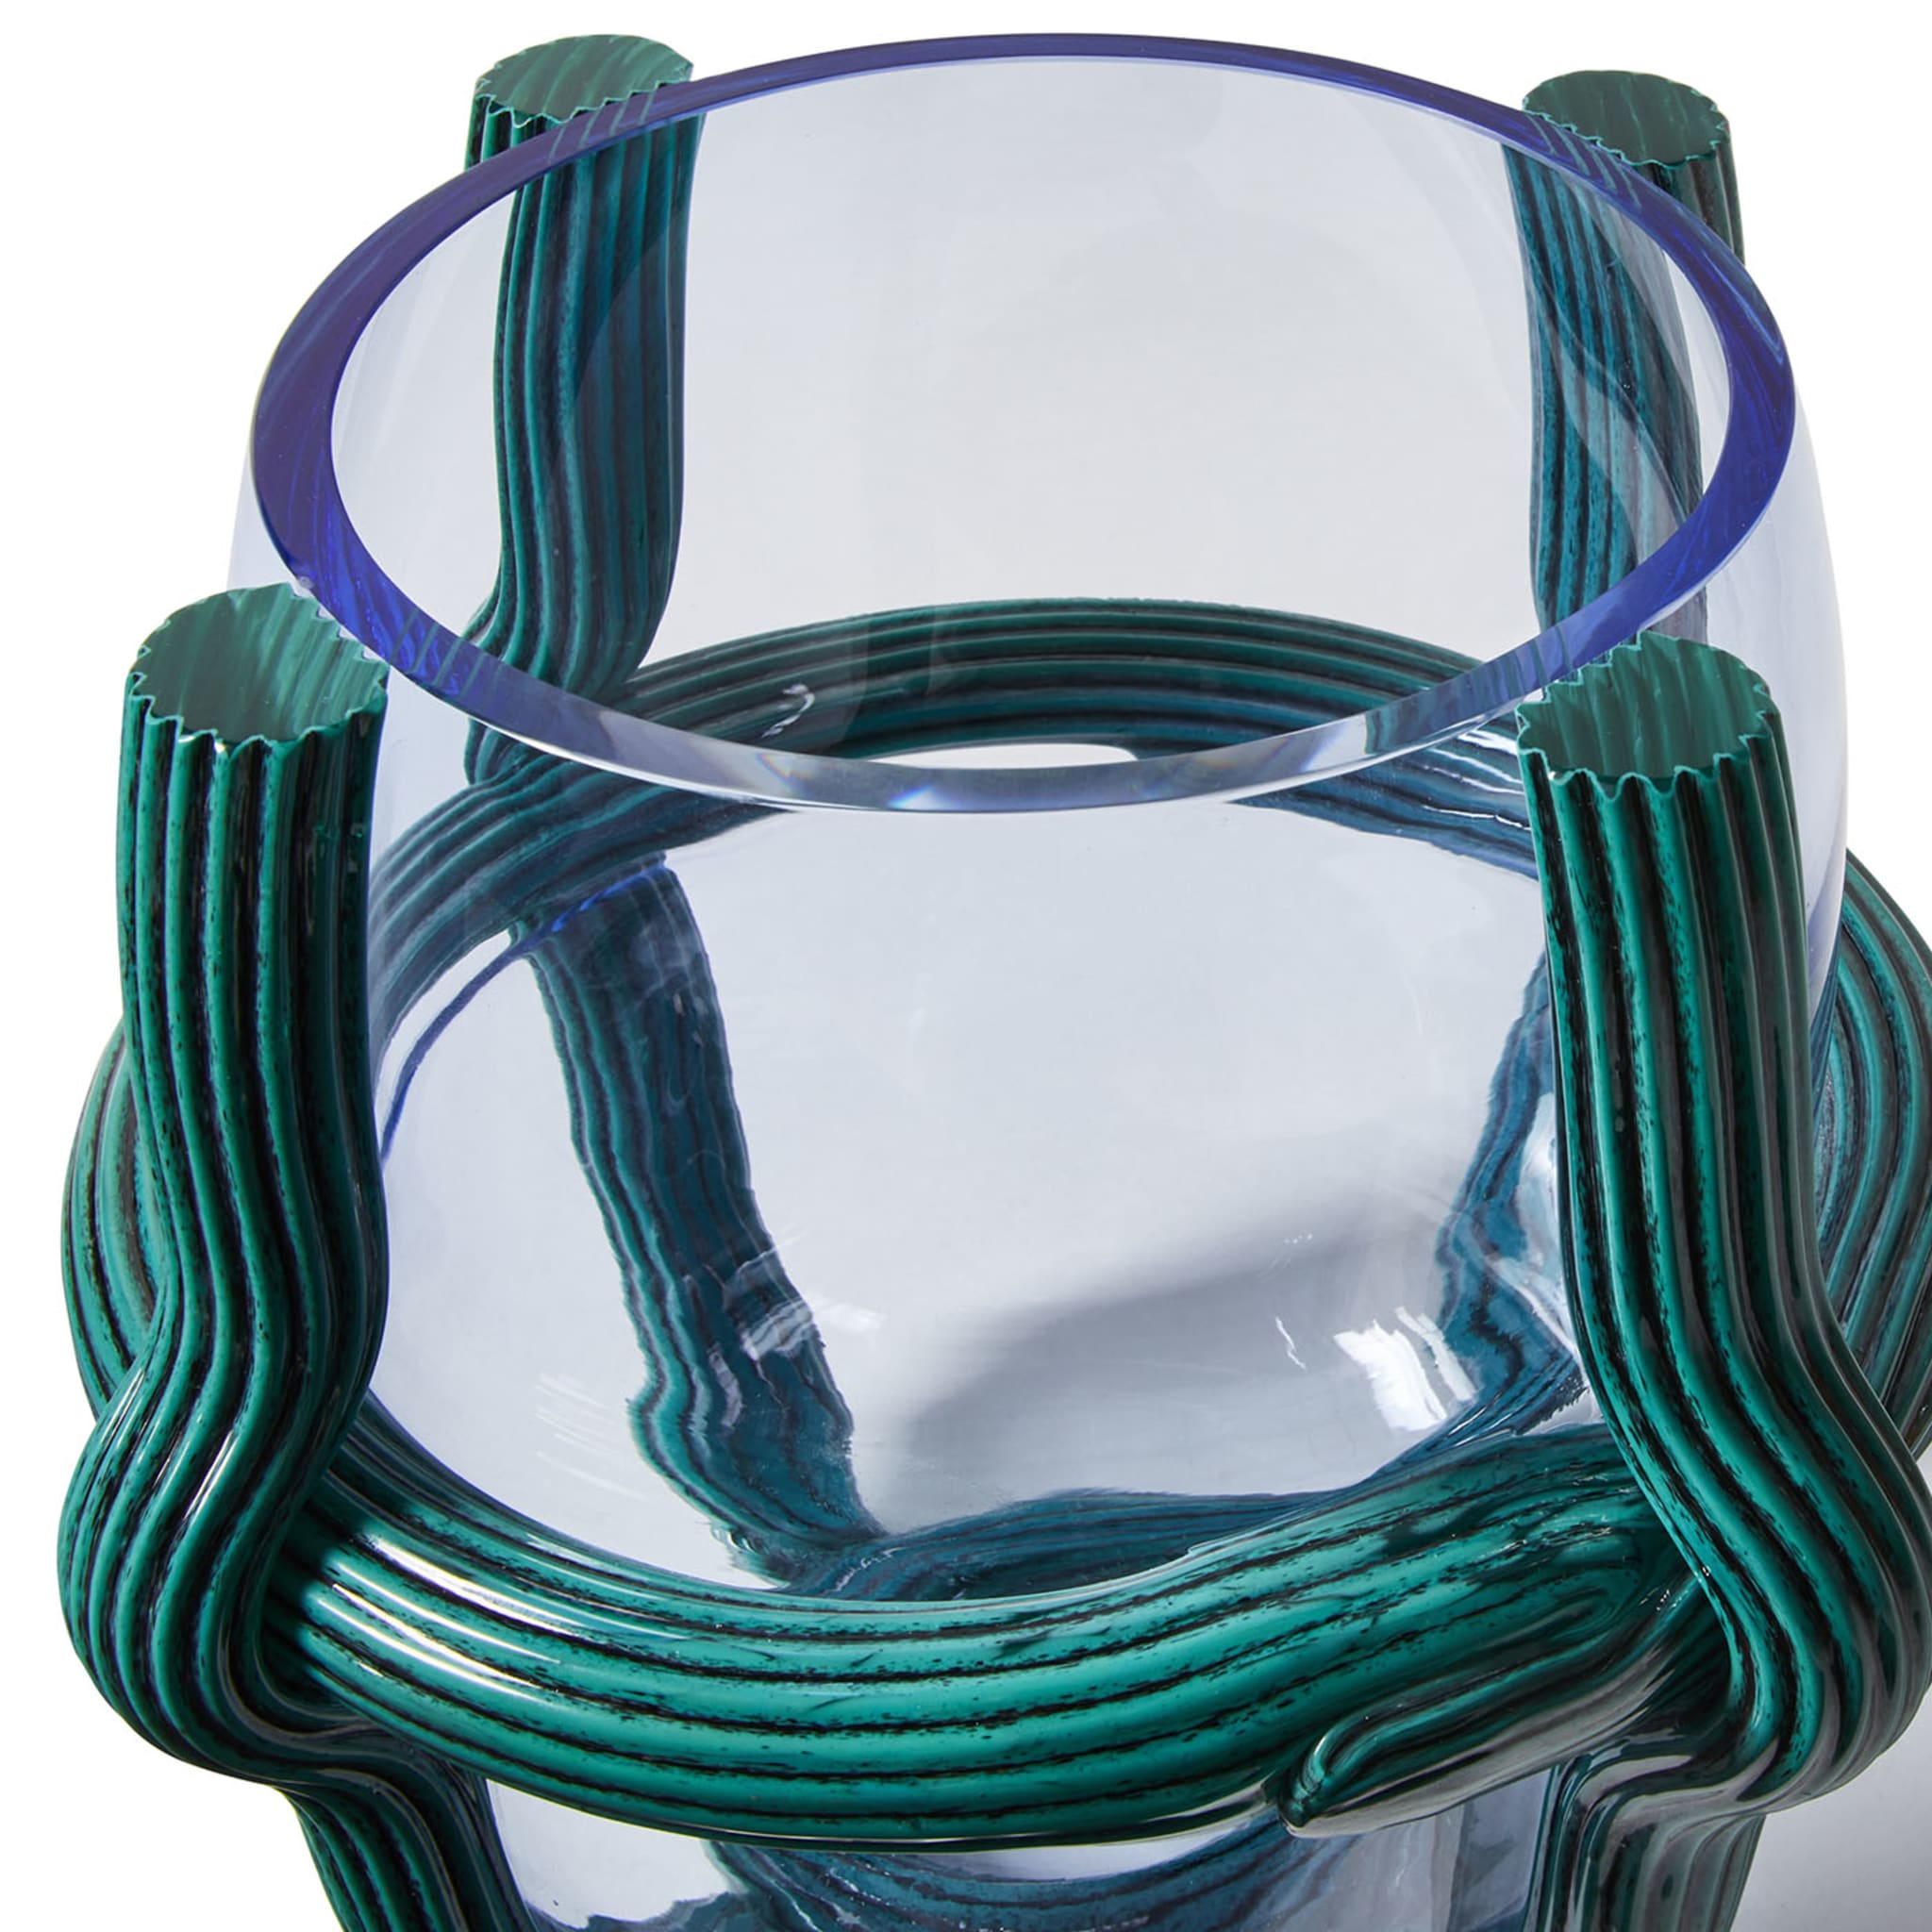 Sestiere Small Teal & Transparent Vase by Patricia Urquiola - Alternative view 1